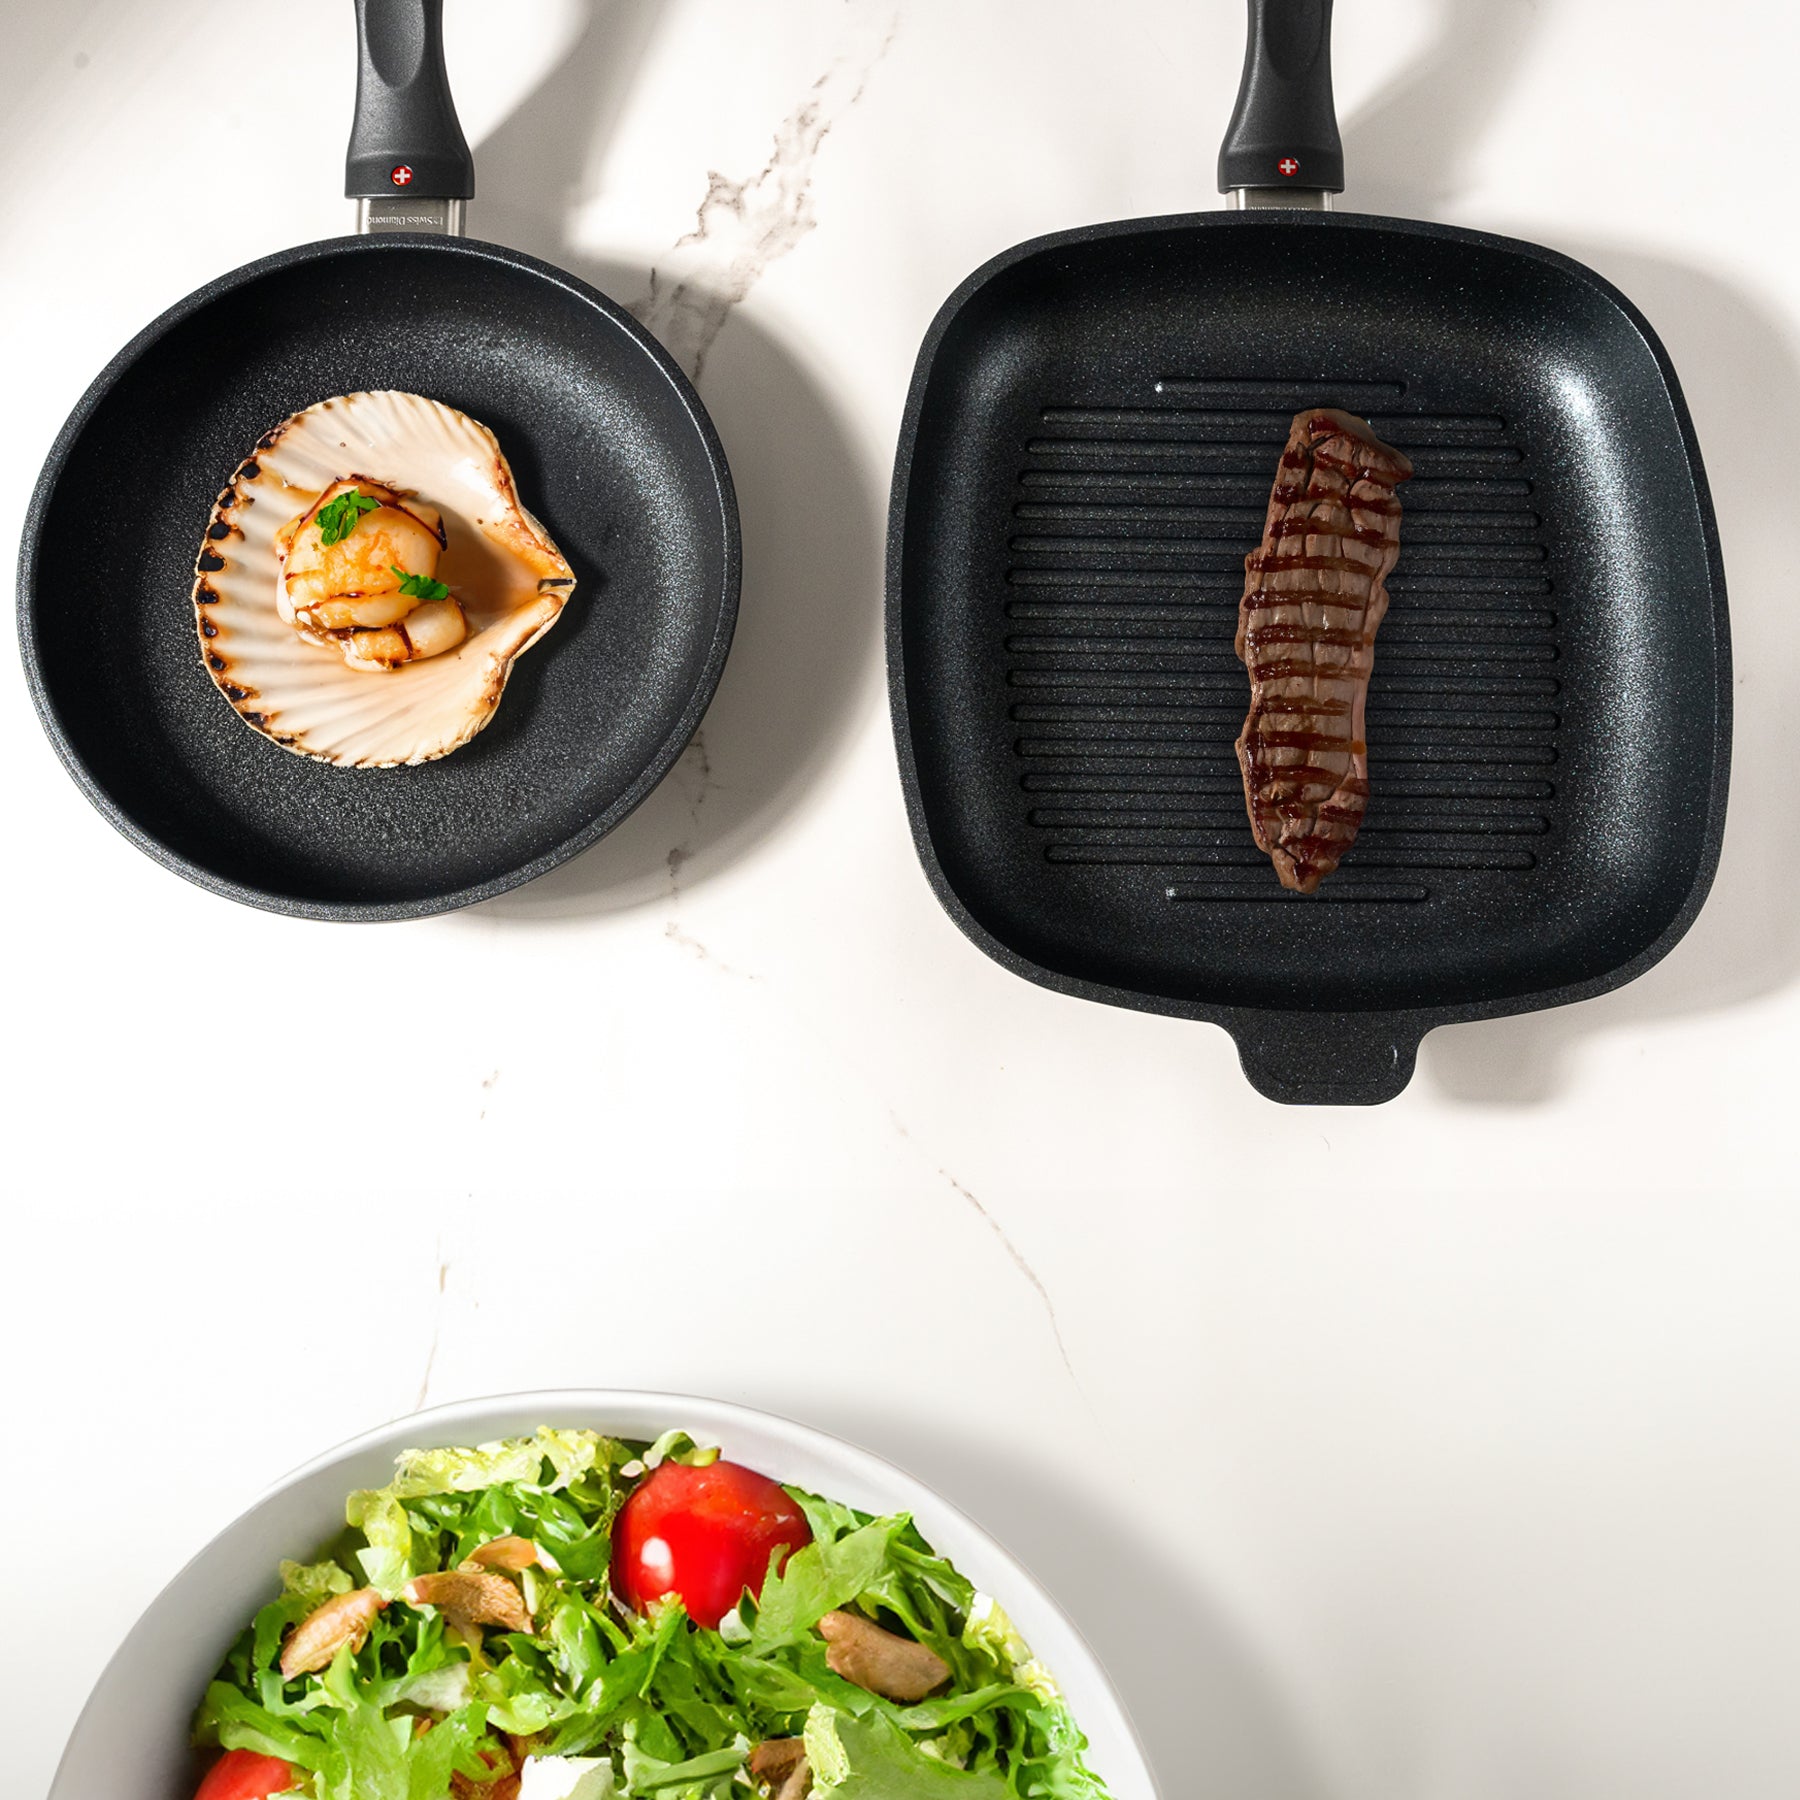 XD Nonstick 8" Fry Pan and 9.5"x 9.5" Grill Pan Set in use with food in pan